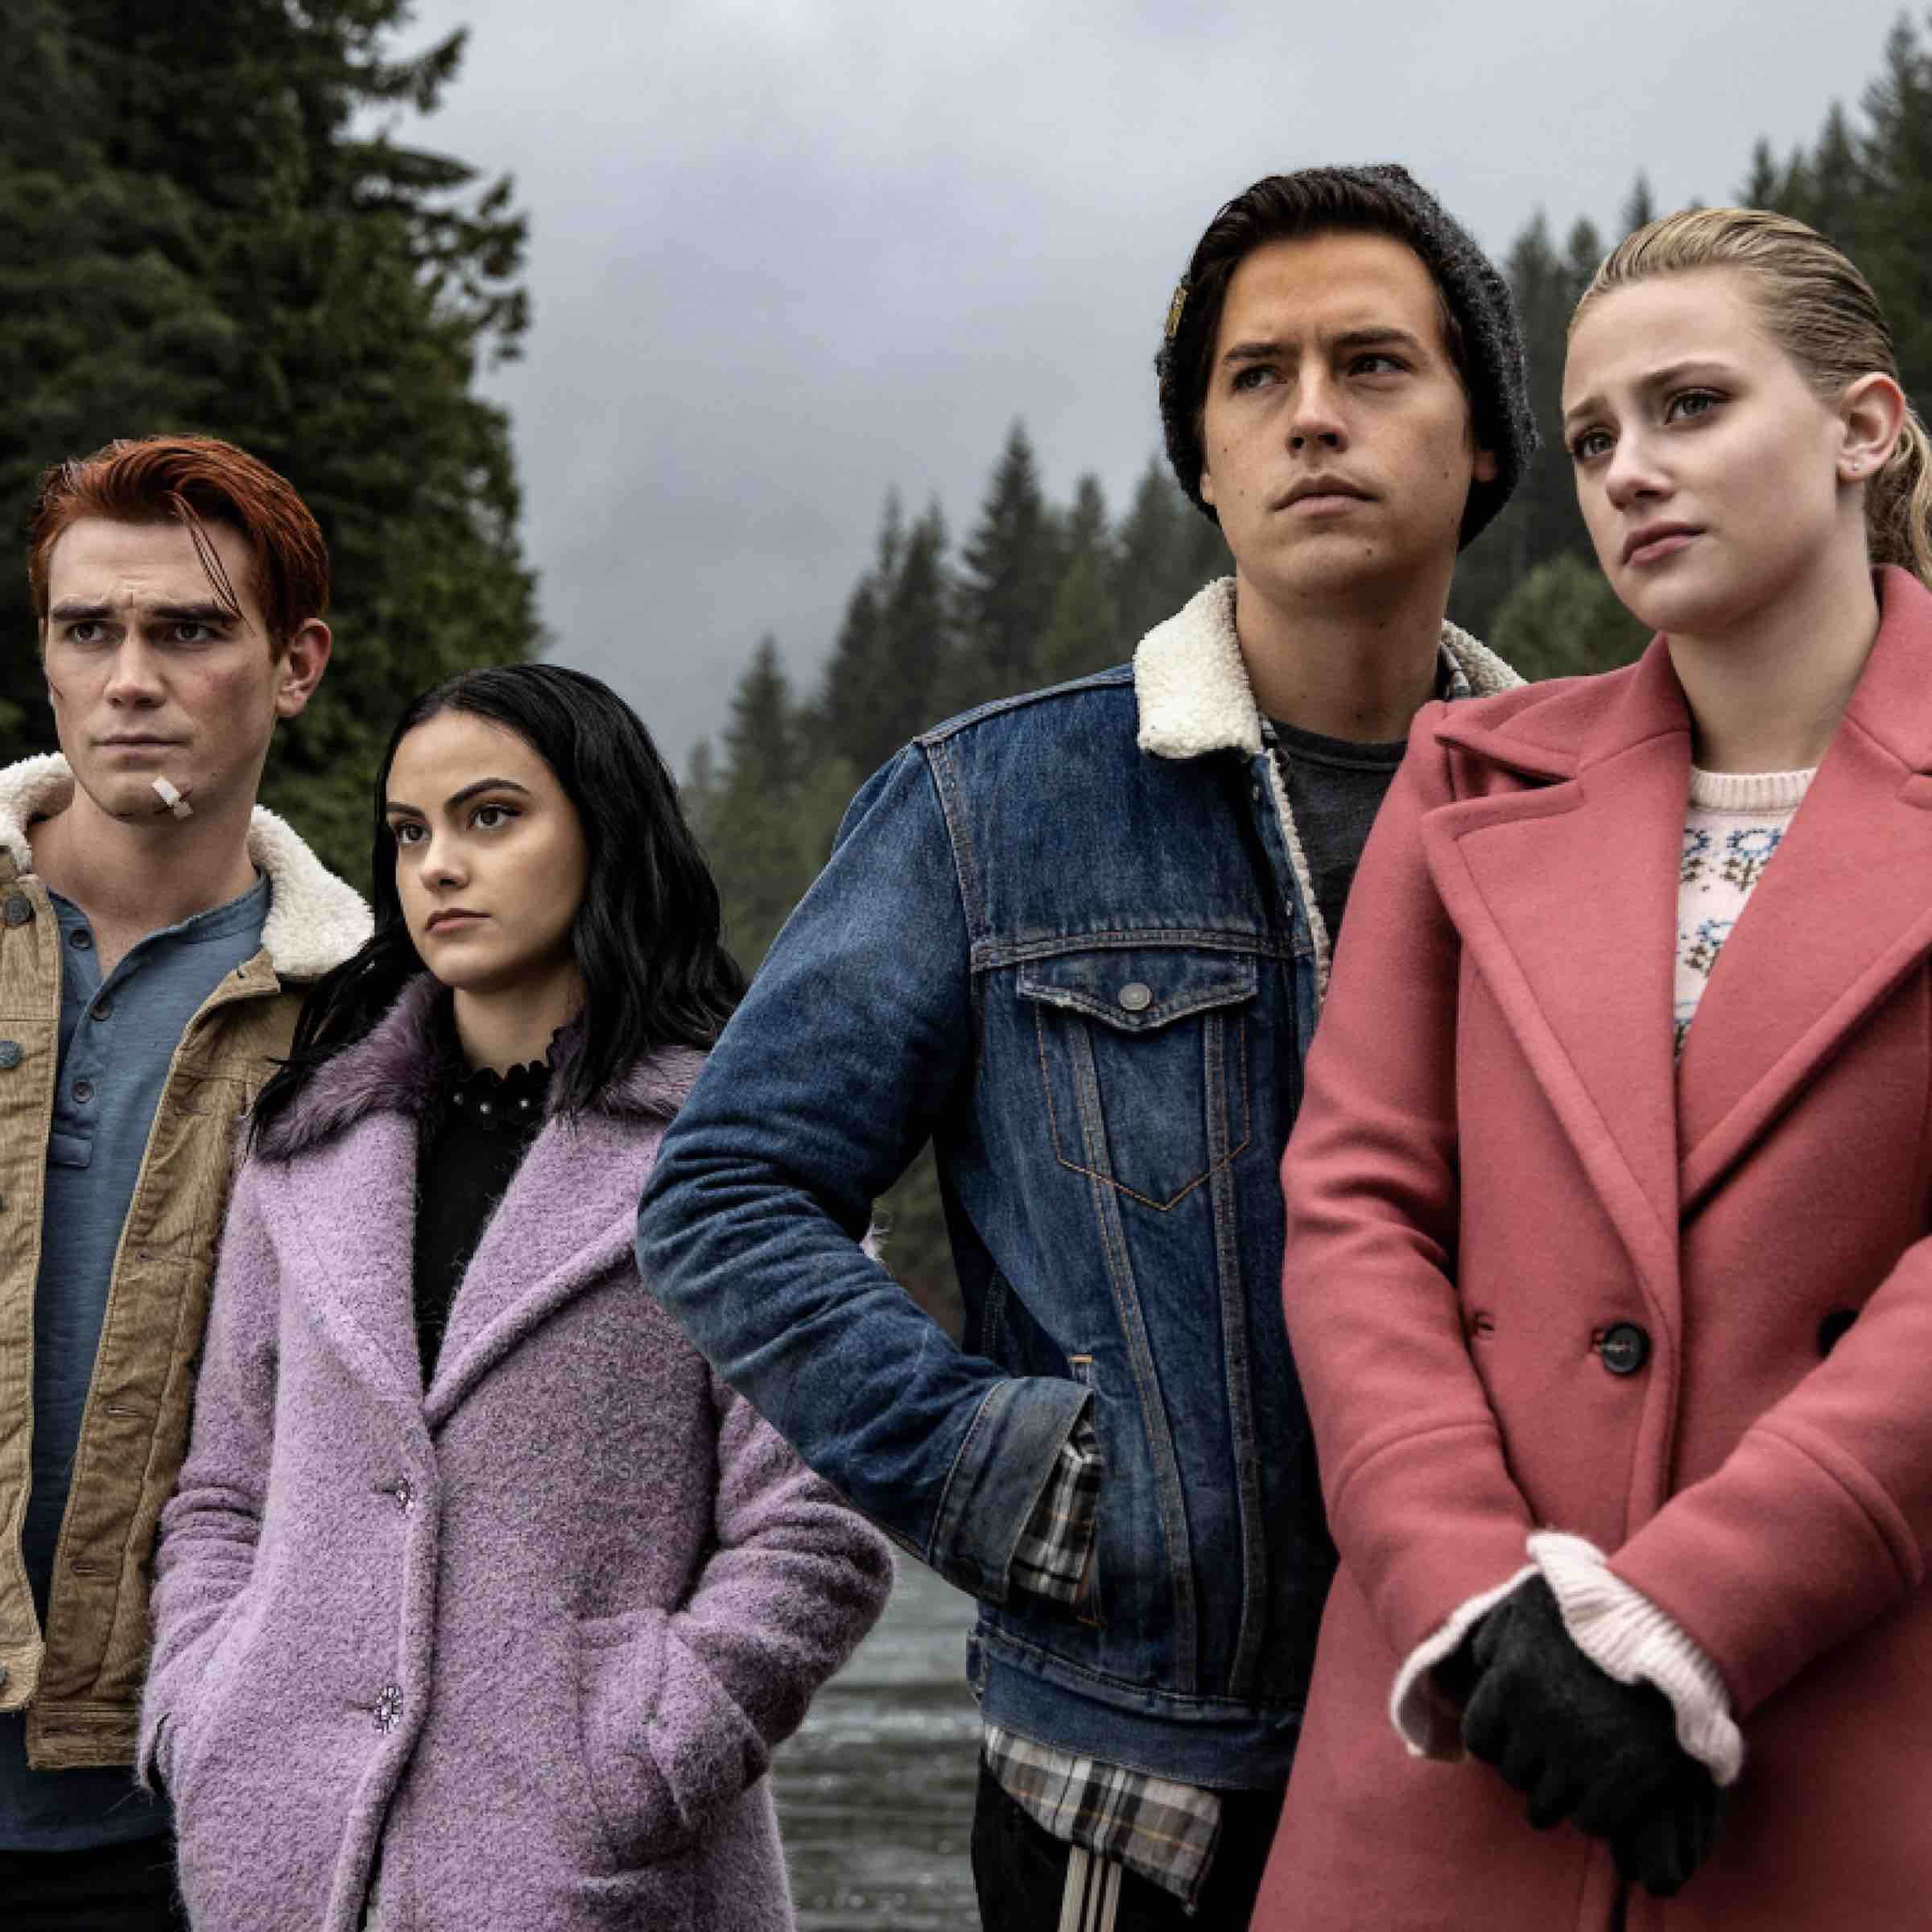 How well do you know 'Riverdale', 'Chilling Adventures of Sabrina', and "Katy Keene'? Take our ultimate Archieverse fandom quiz to find out.